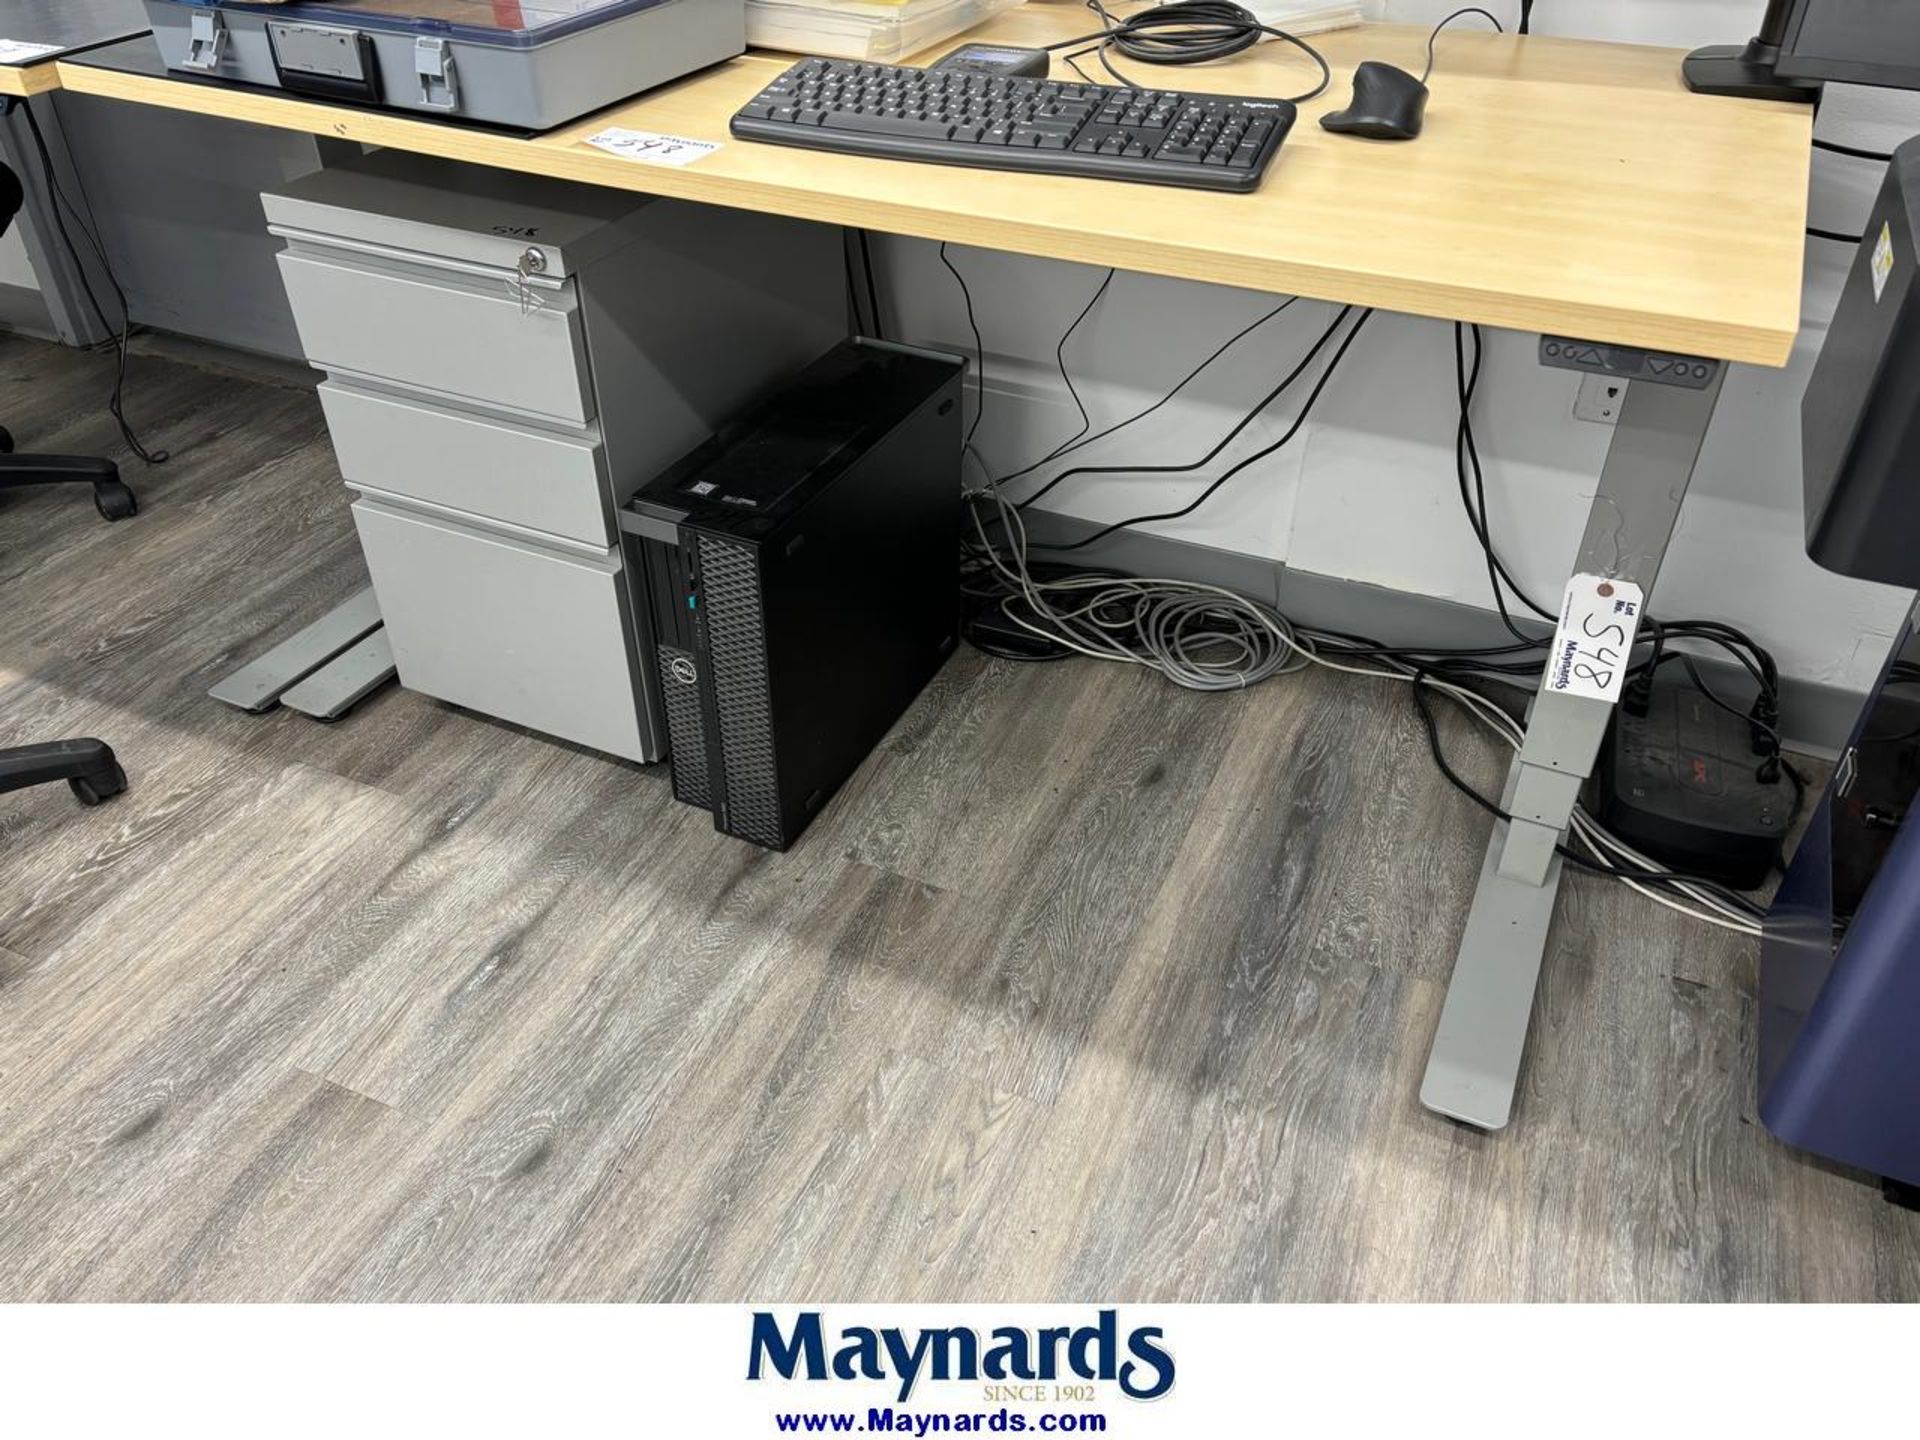 work to stand desk - Image 2 of 2